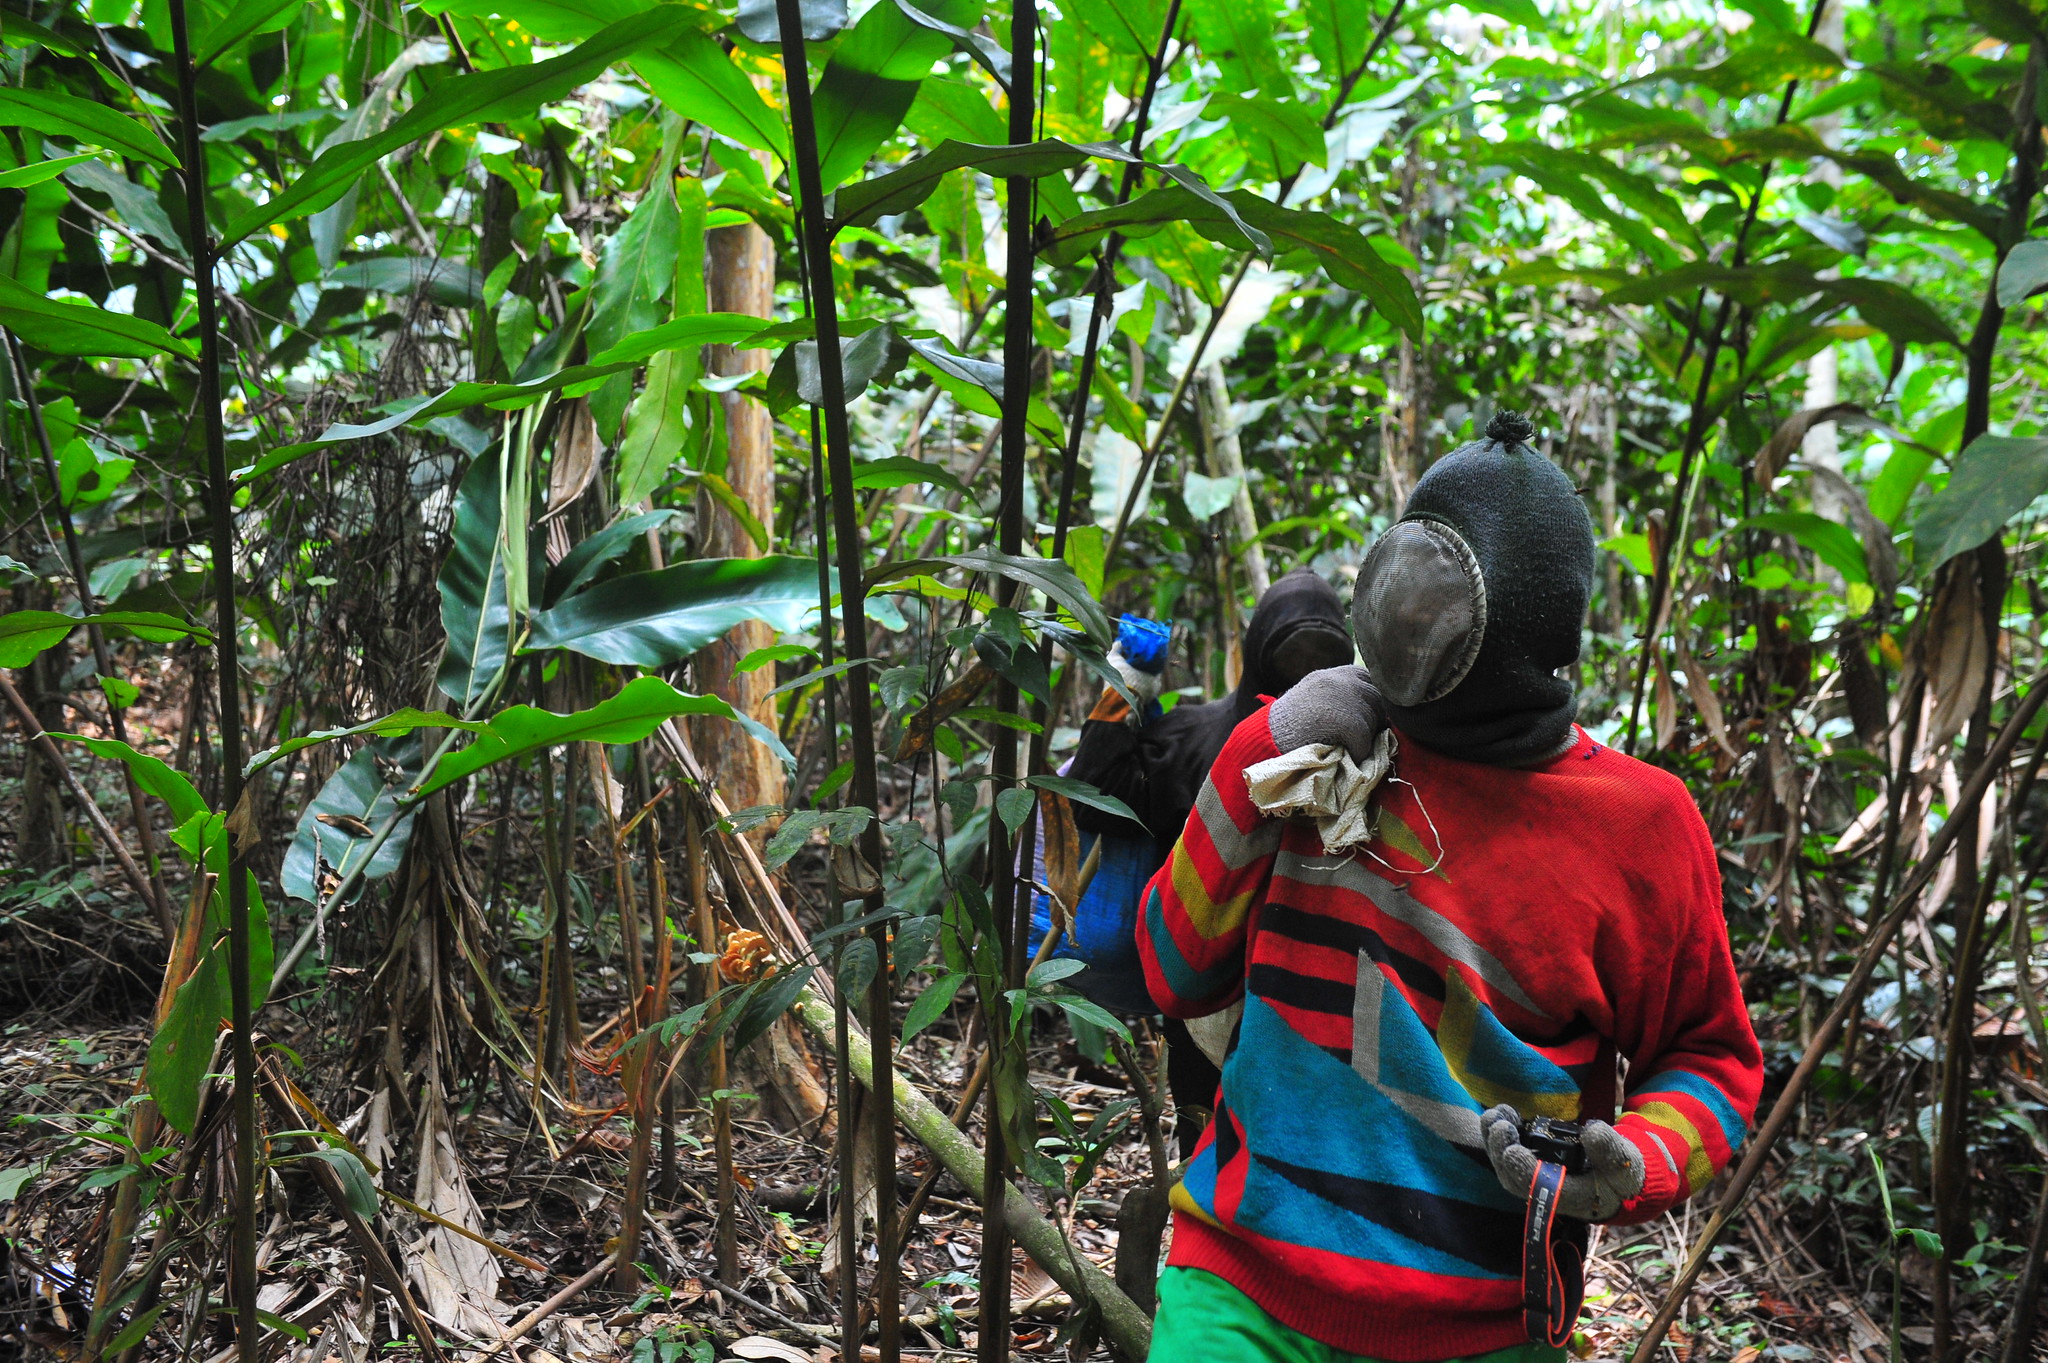 Cultivating vanilla to support the forest and sustainable livelihoods